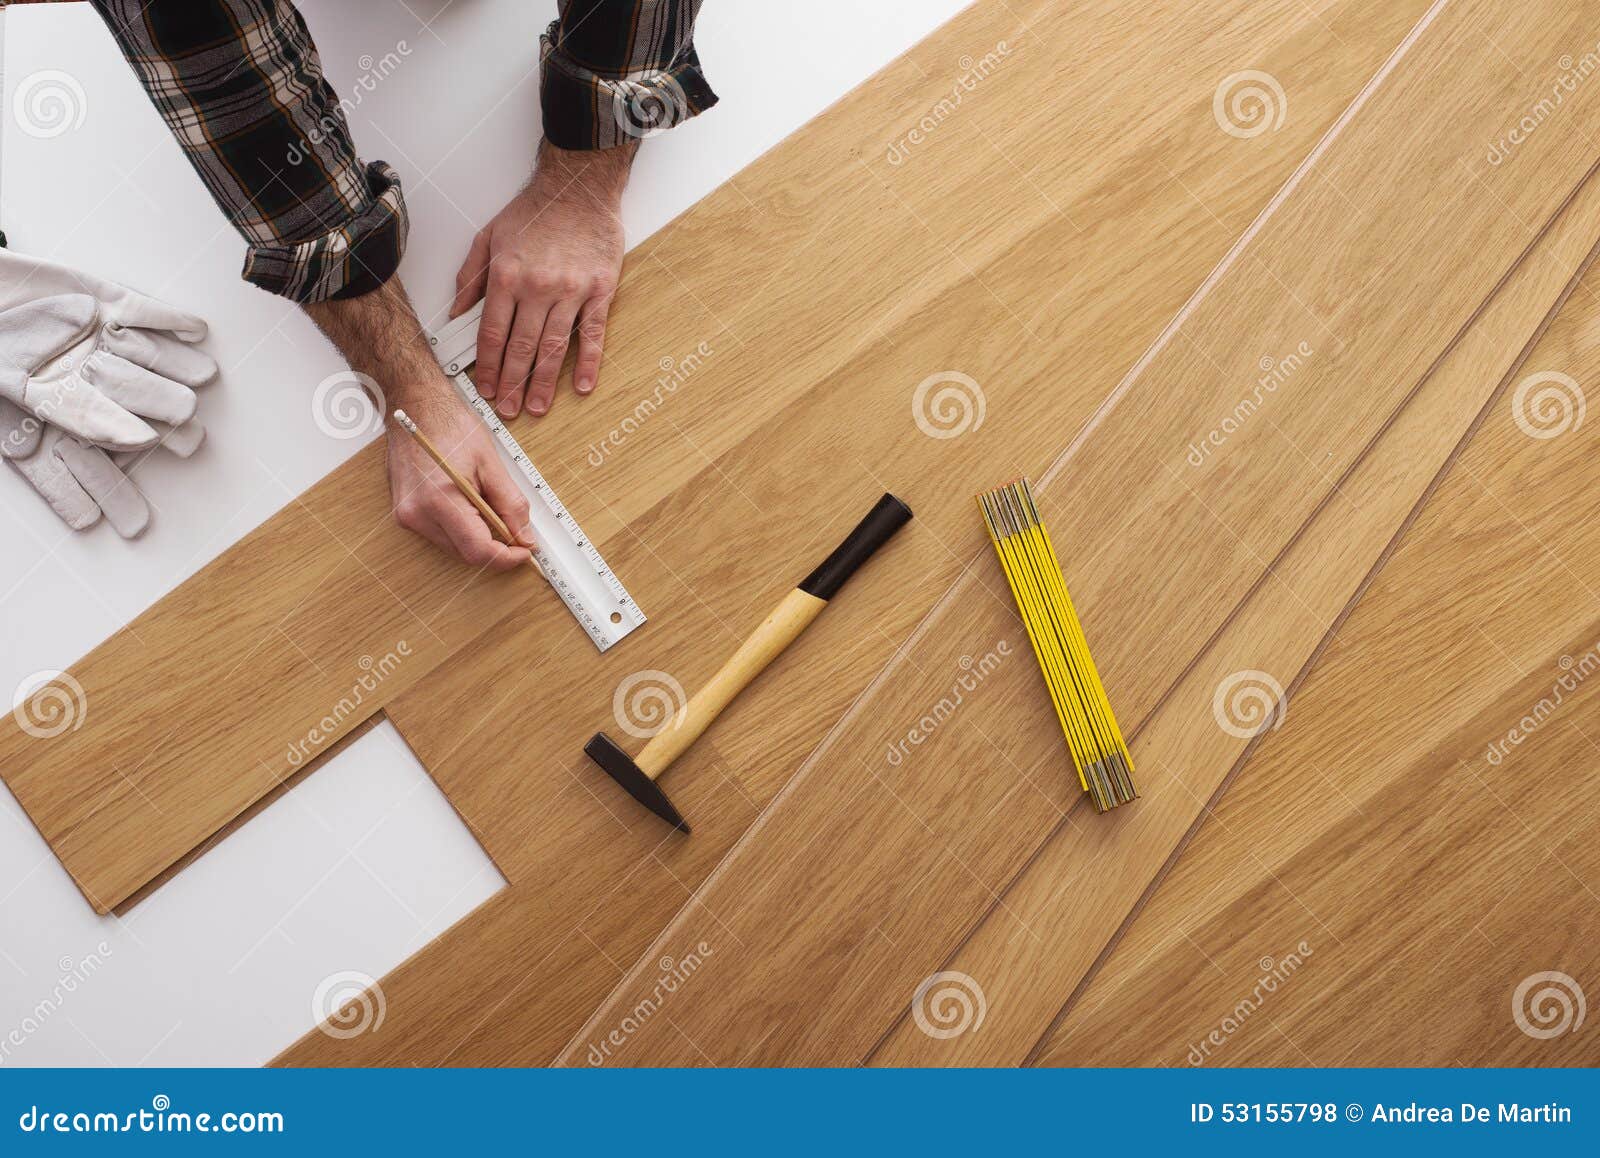 Carpenter Installing A Wooden Flooring Stock Photo Image Of